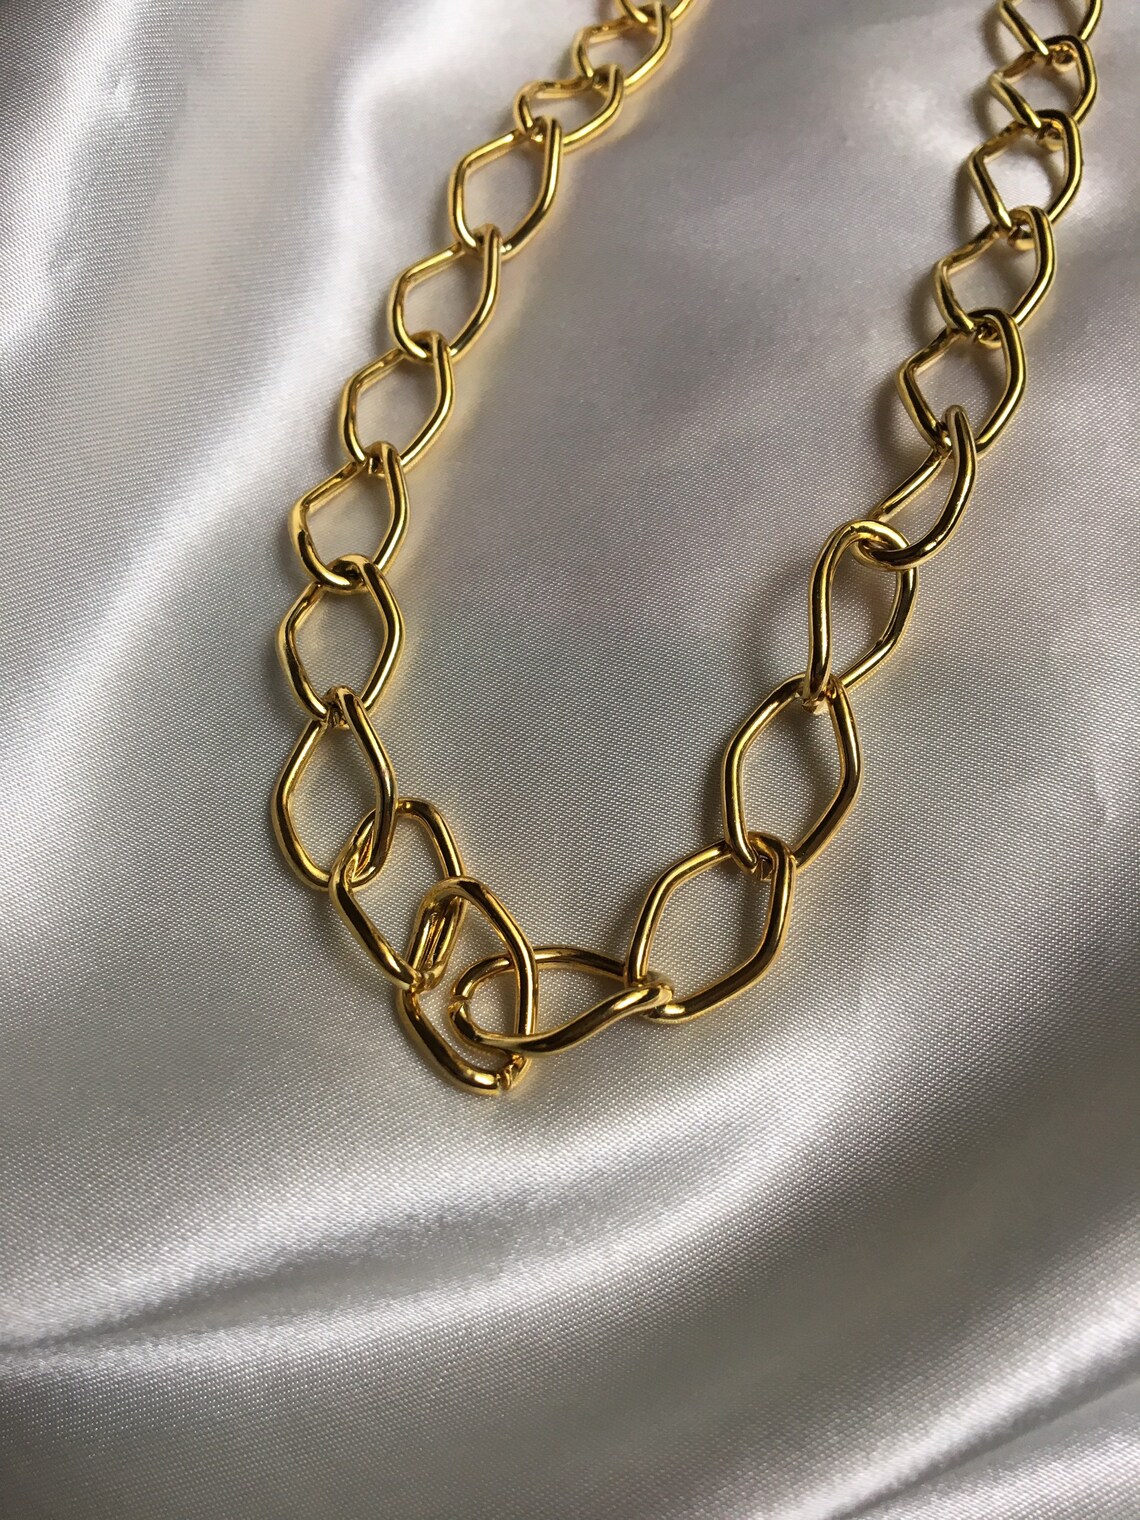 Vintage Monet Gold Link Chain Necklace Monet Jewelry Wide | Etsy